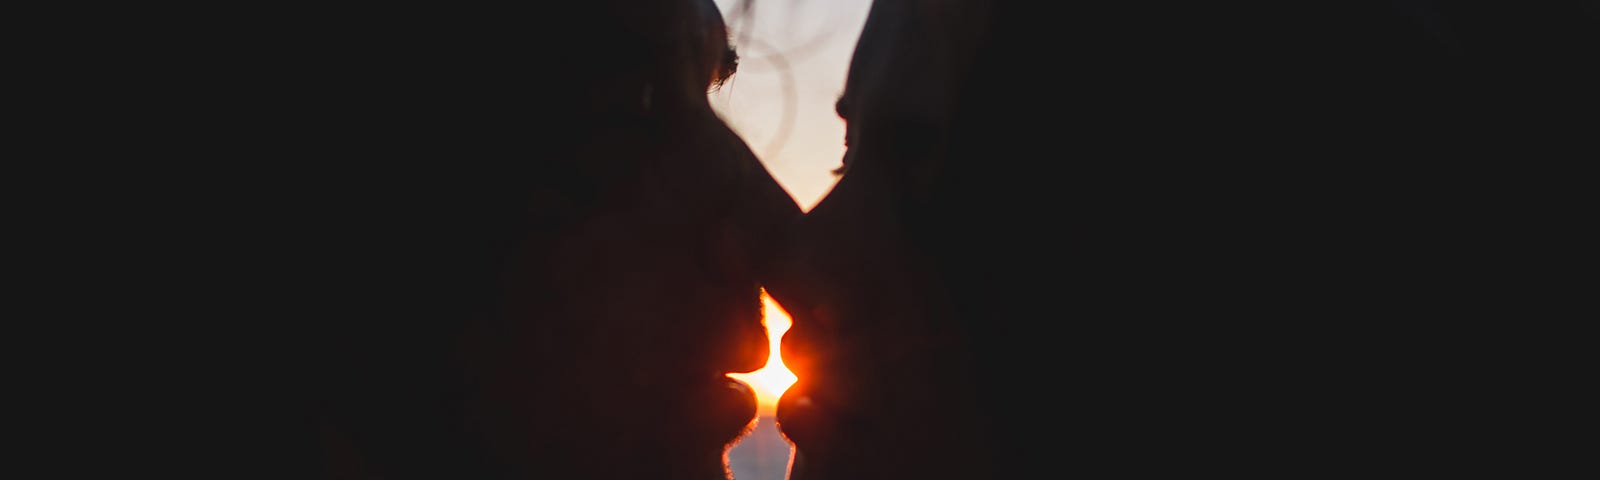 Man and woman kiss with the setting sun in the background